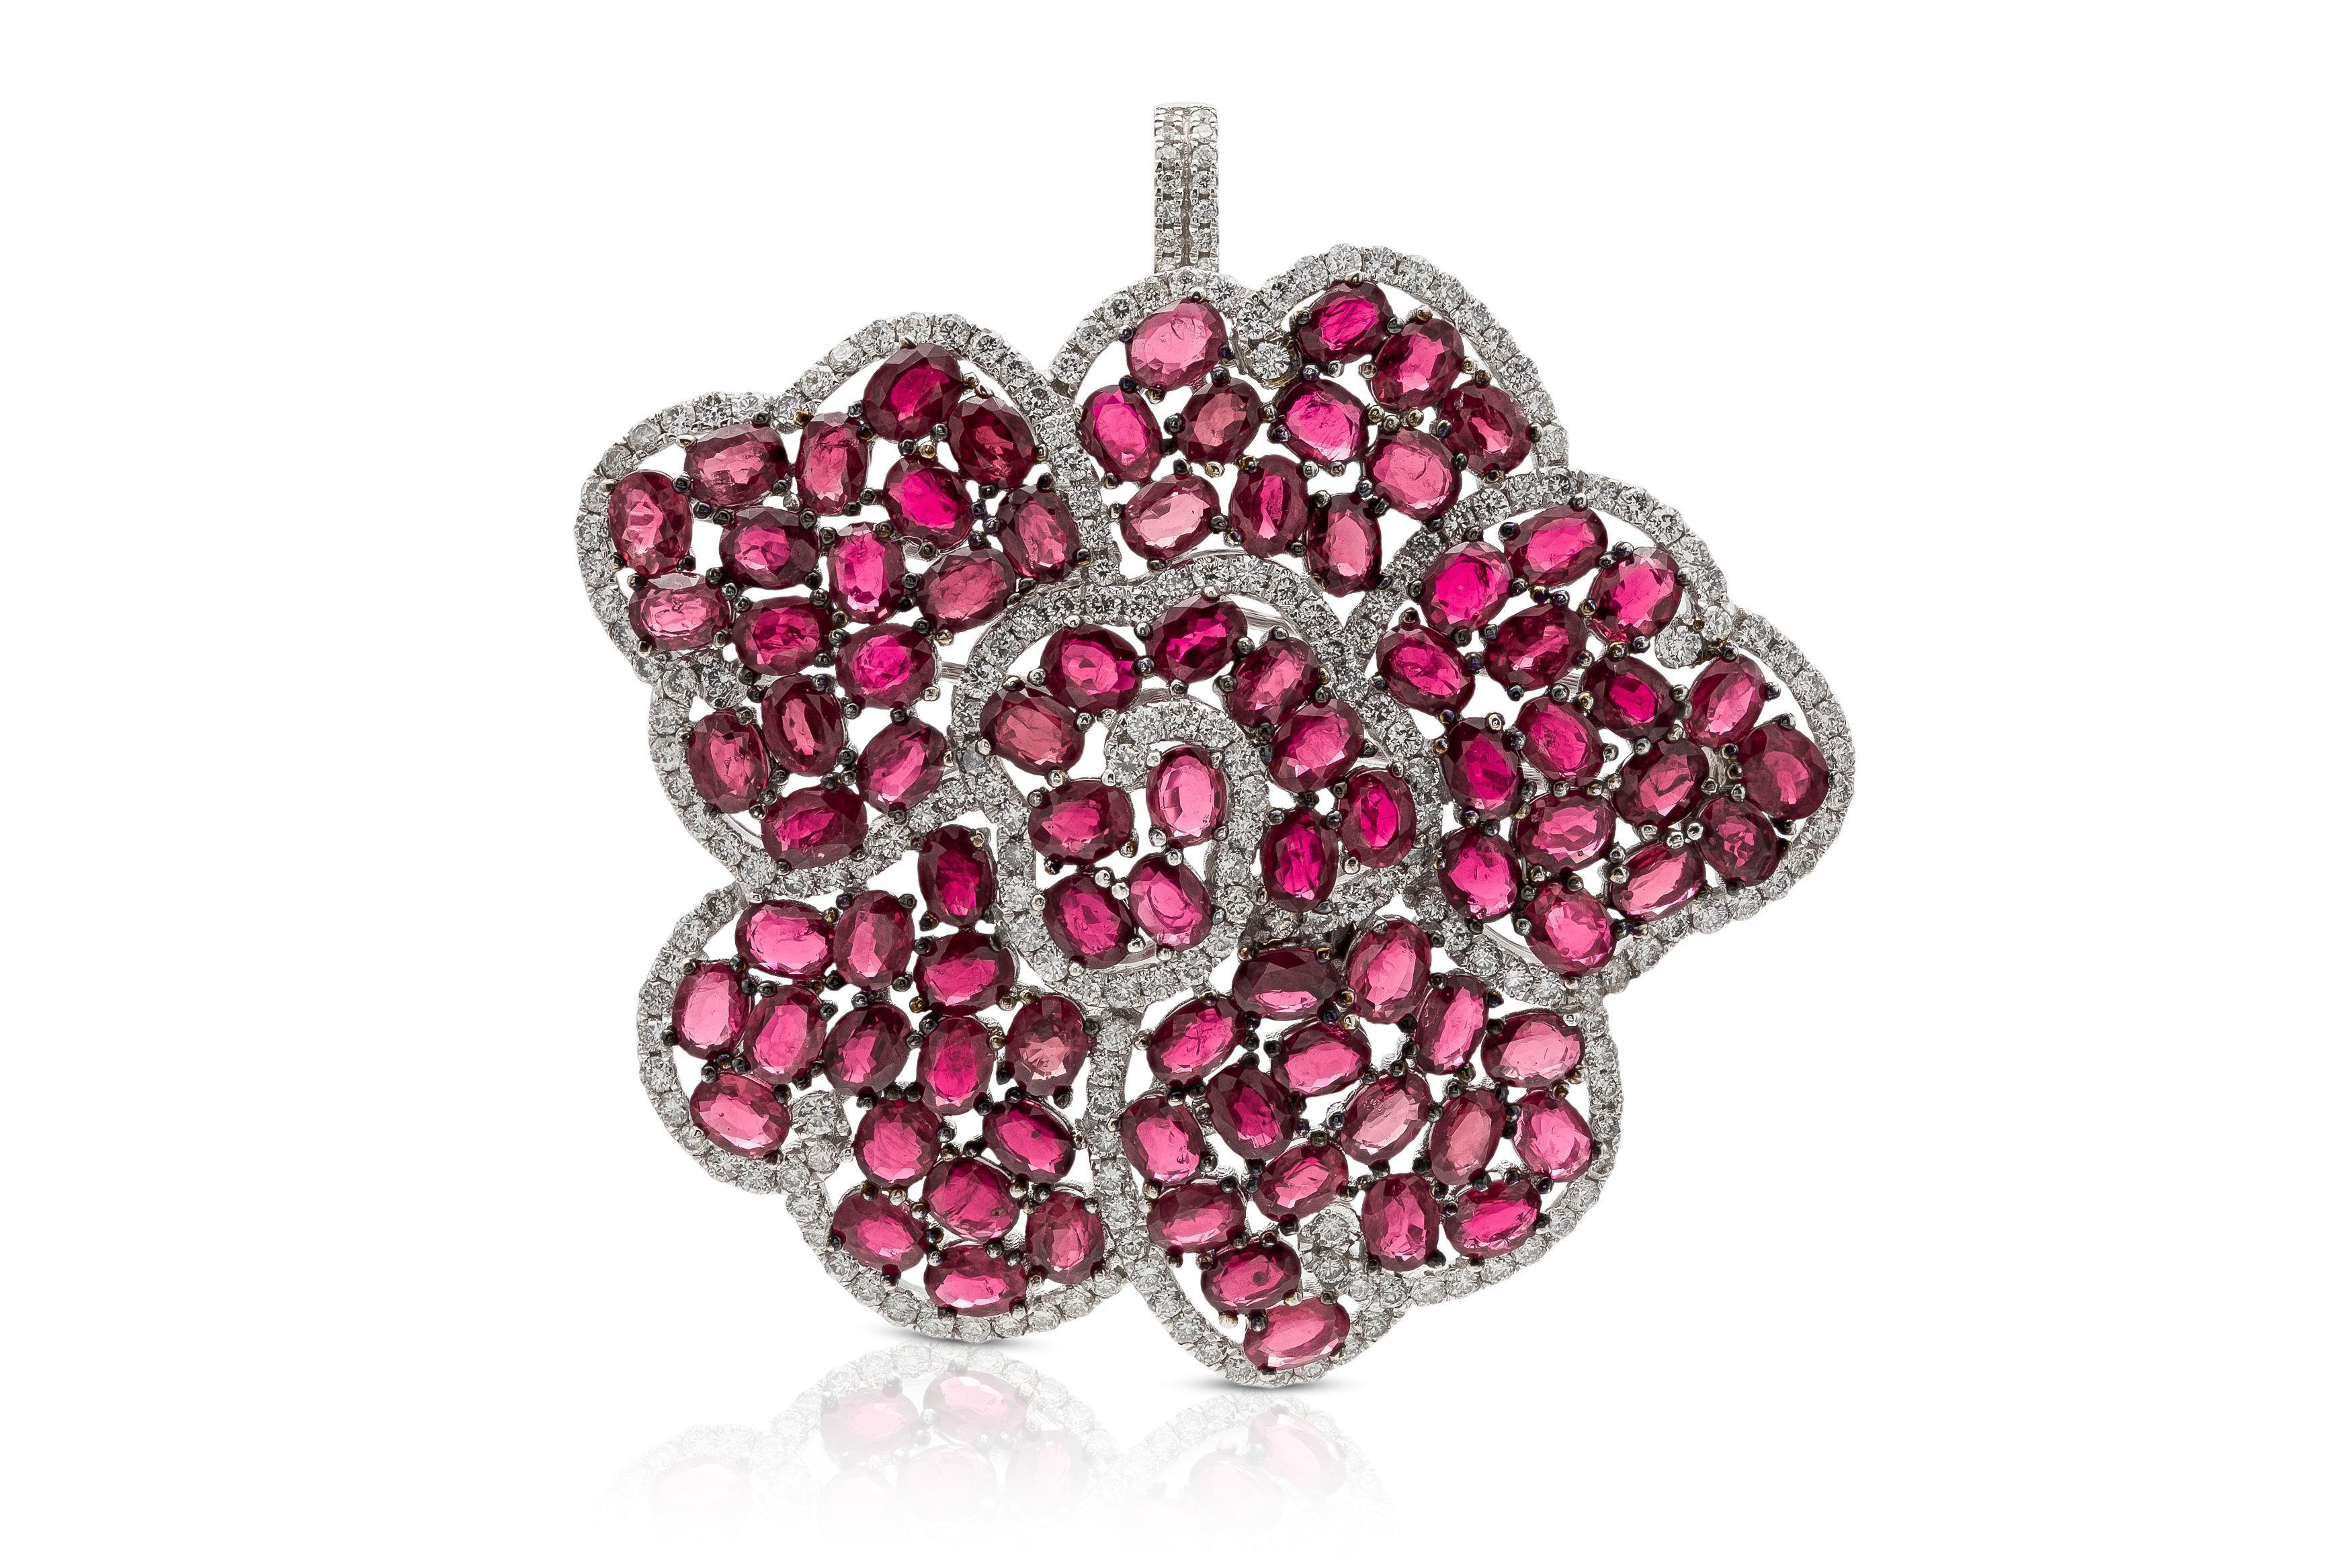 21.26 Carat Ruby and Diamonds Flower Brooch Pendant In Good Condition For Sale In New York, NY